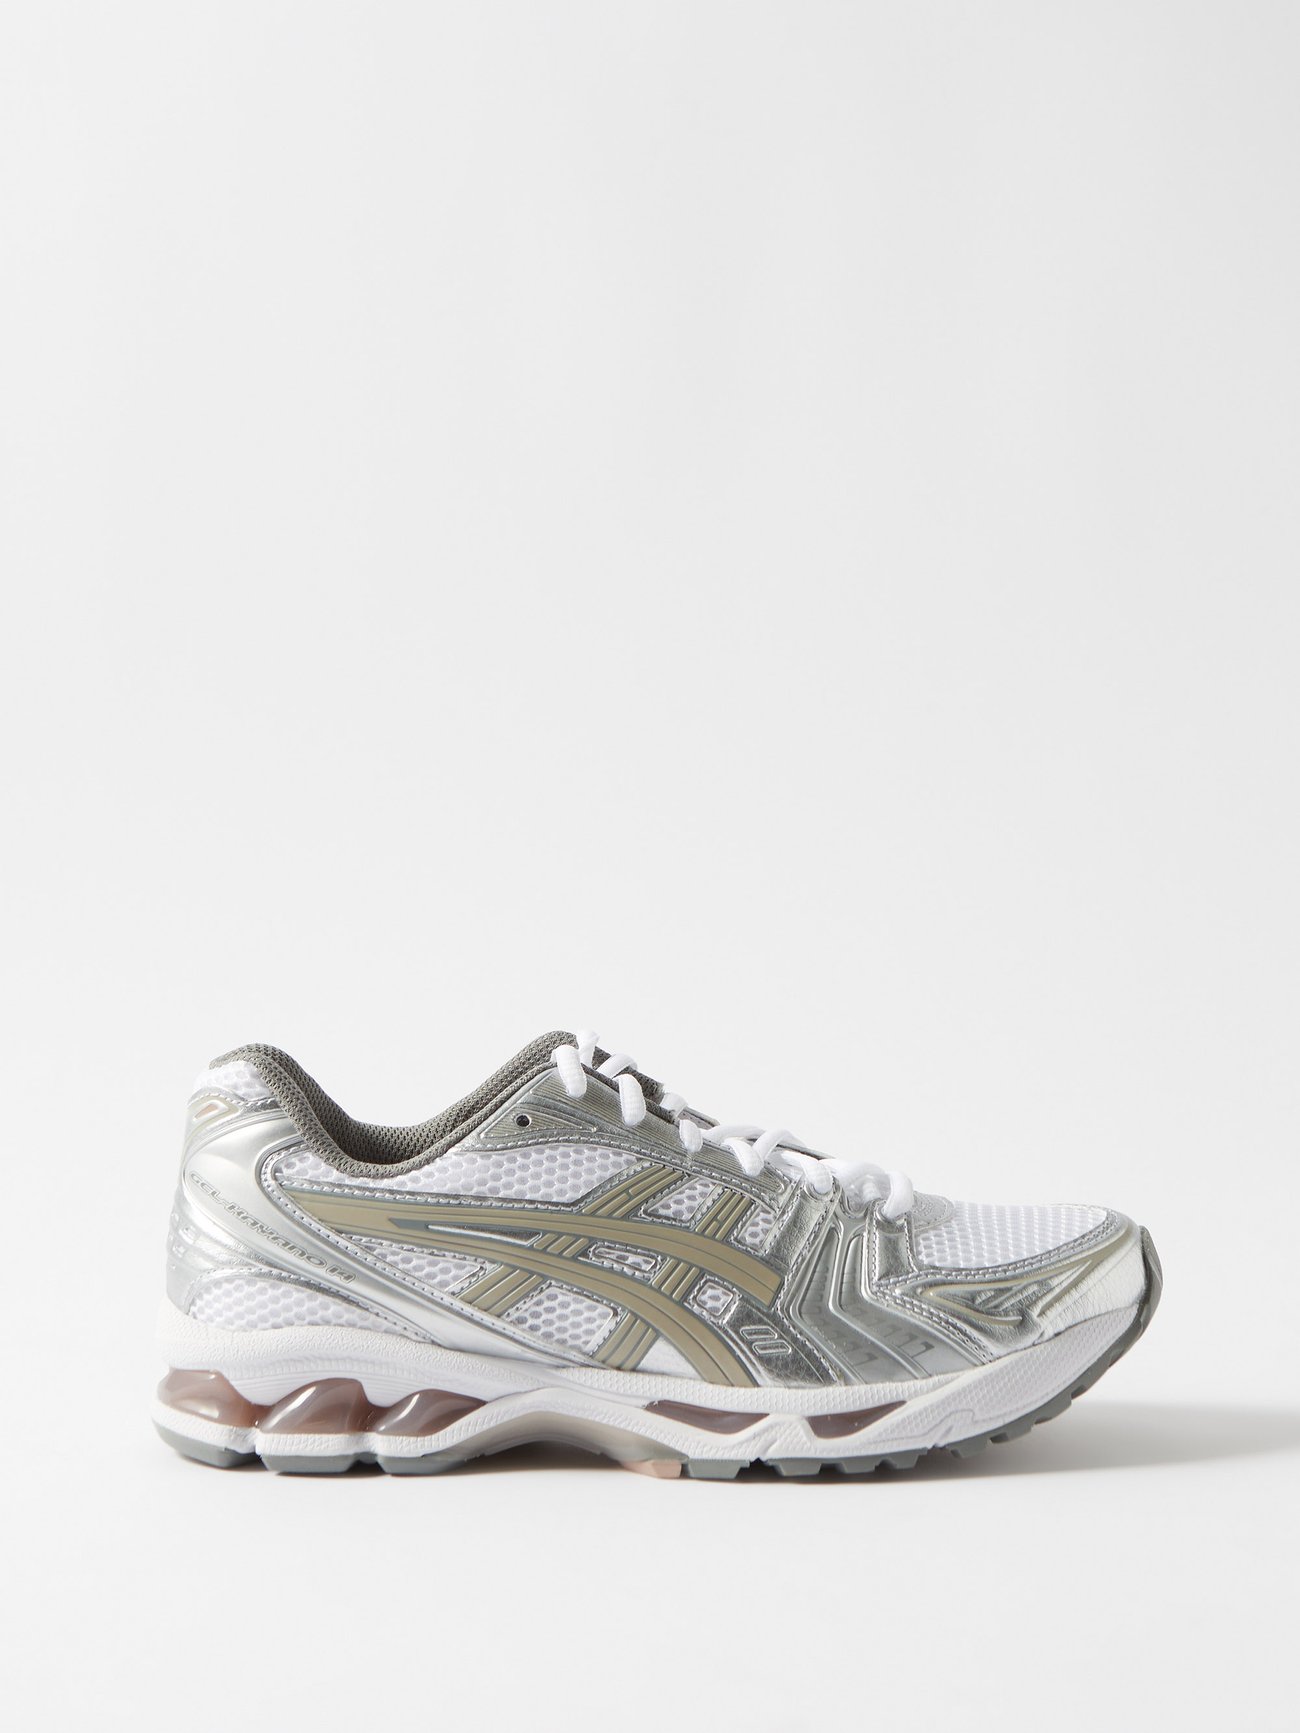 Silver GEL-Kayano 14 and rubber trainers | Asics | MATCHESFASHION UK